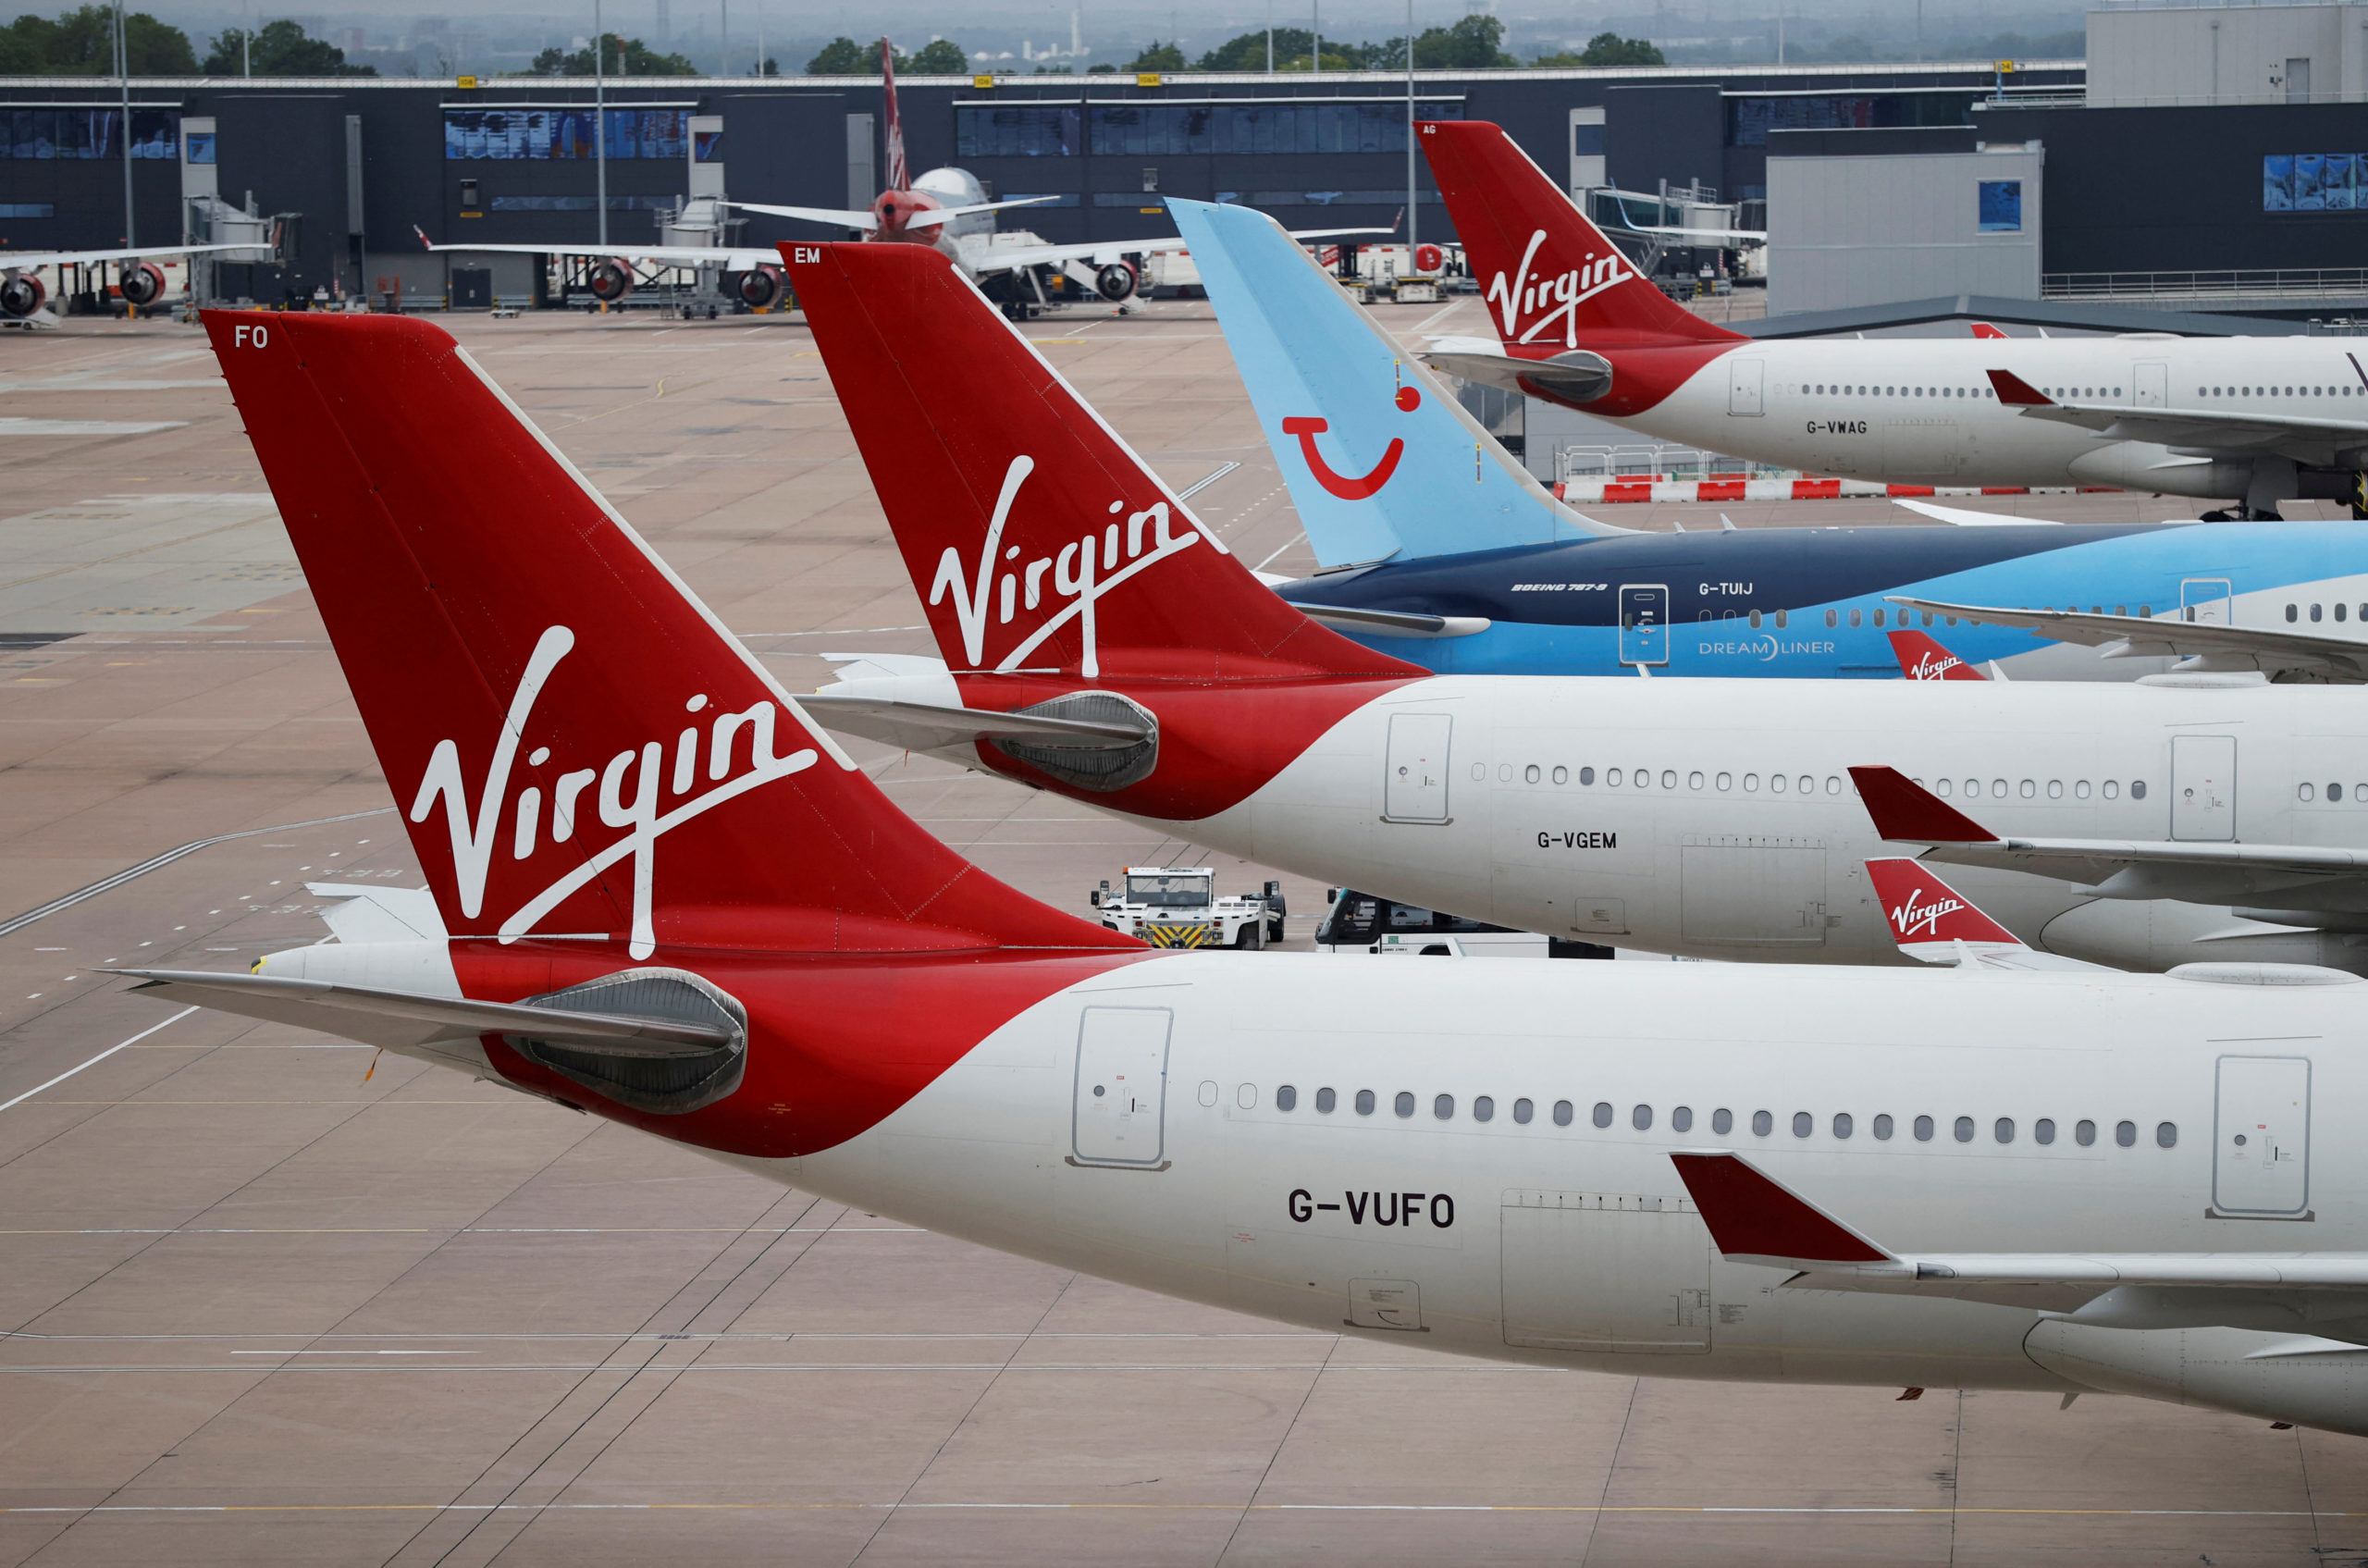 Virgin Atlantic is fined $1.05 million for flying in restricted airspace over Iraq.